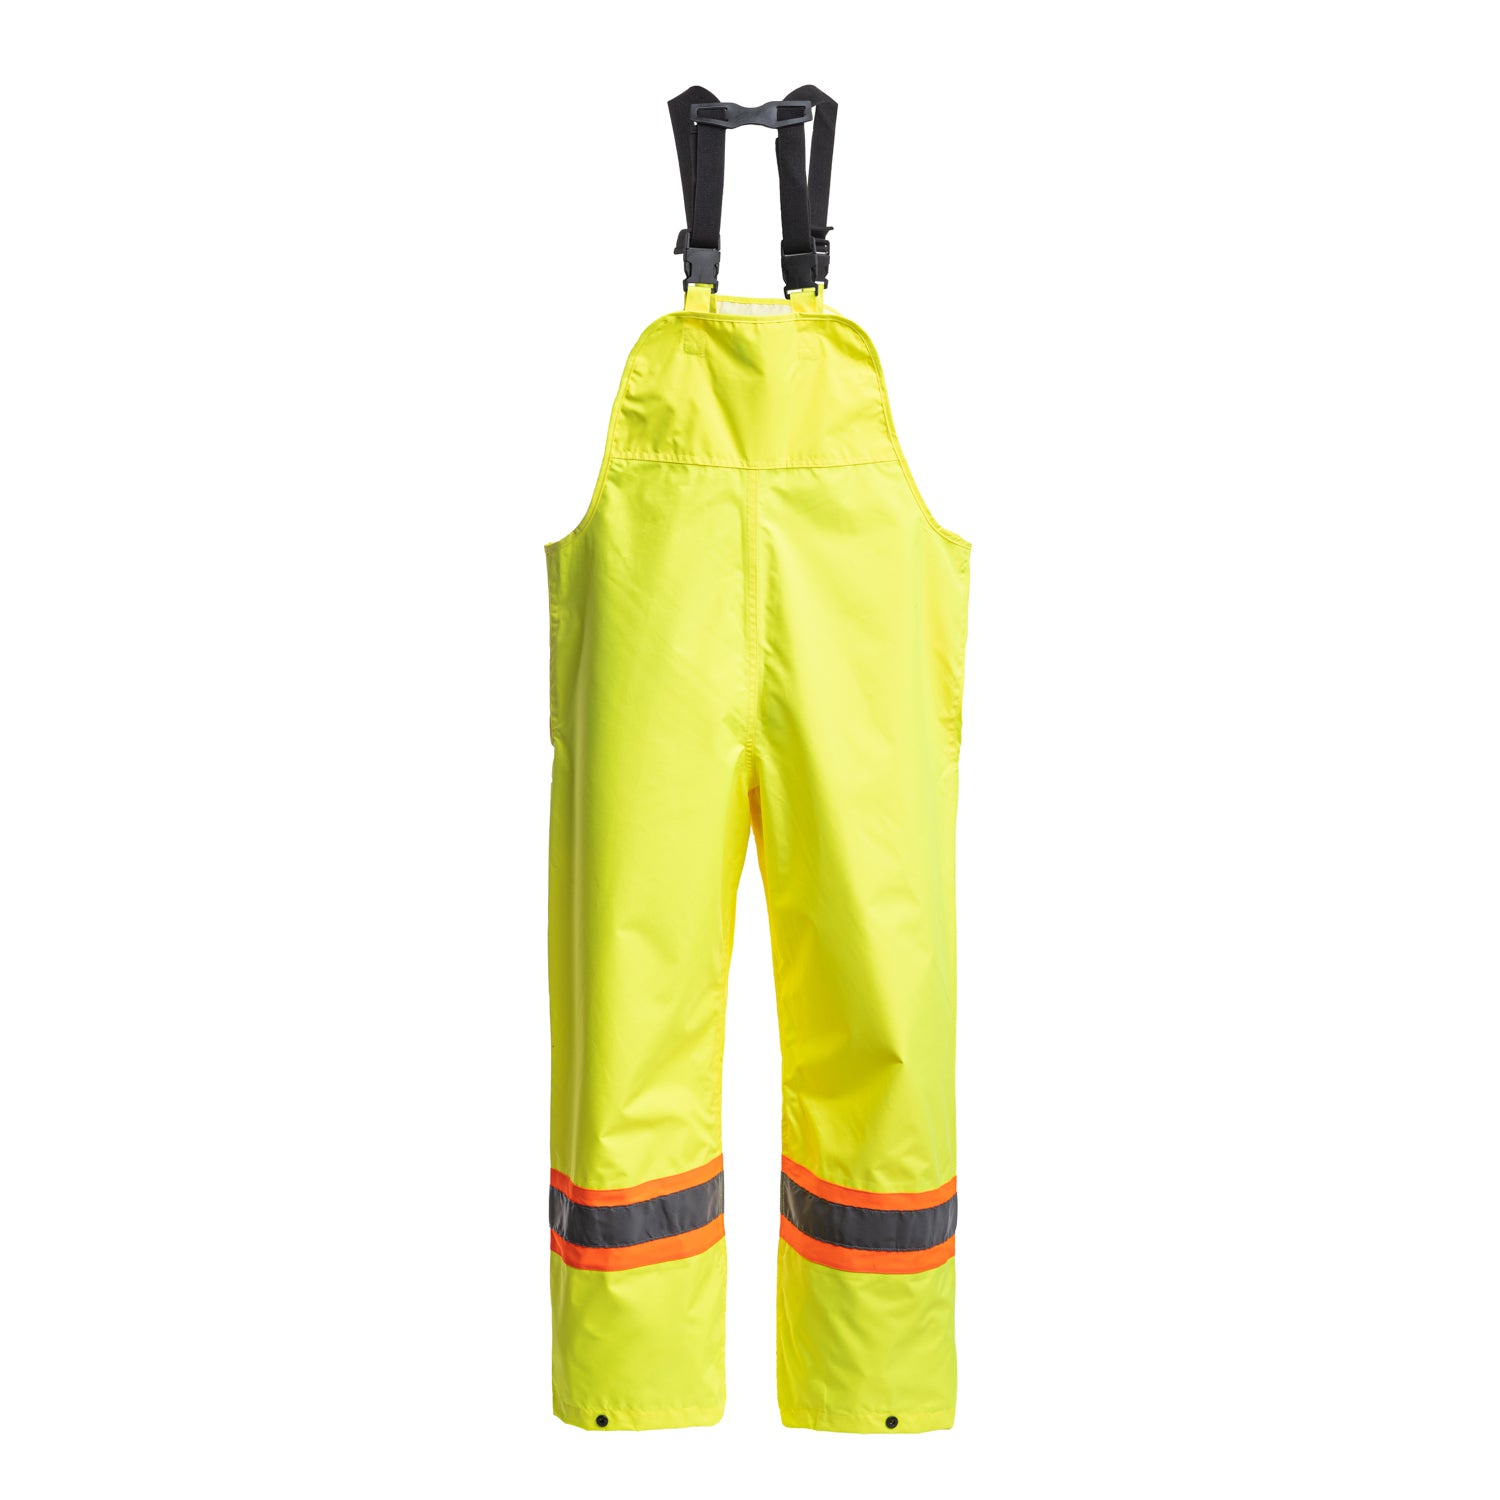 Ventilated Work Pants - P004 BUY 2, SAVE $10